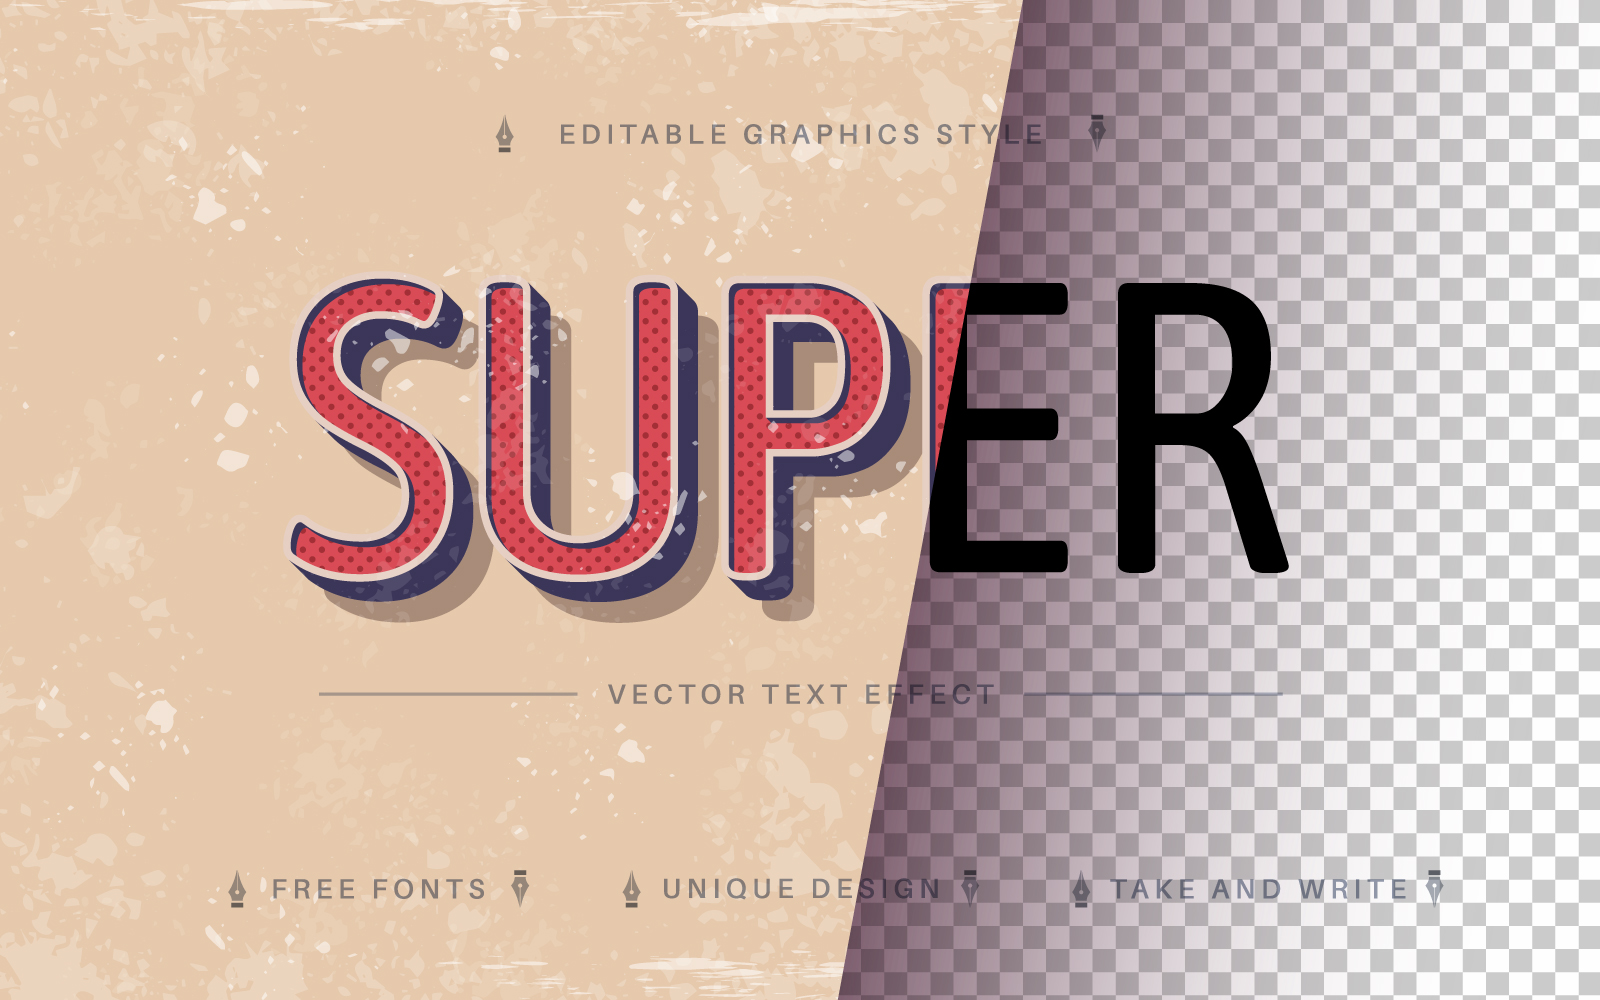 Super Retro - Editable Text Effect, Font Style, Graphics Template